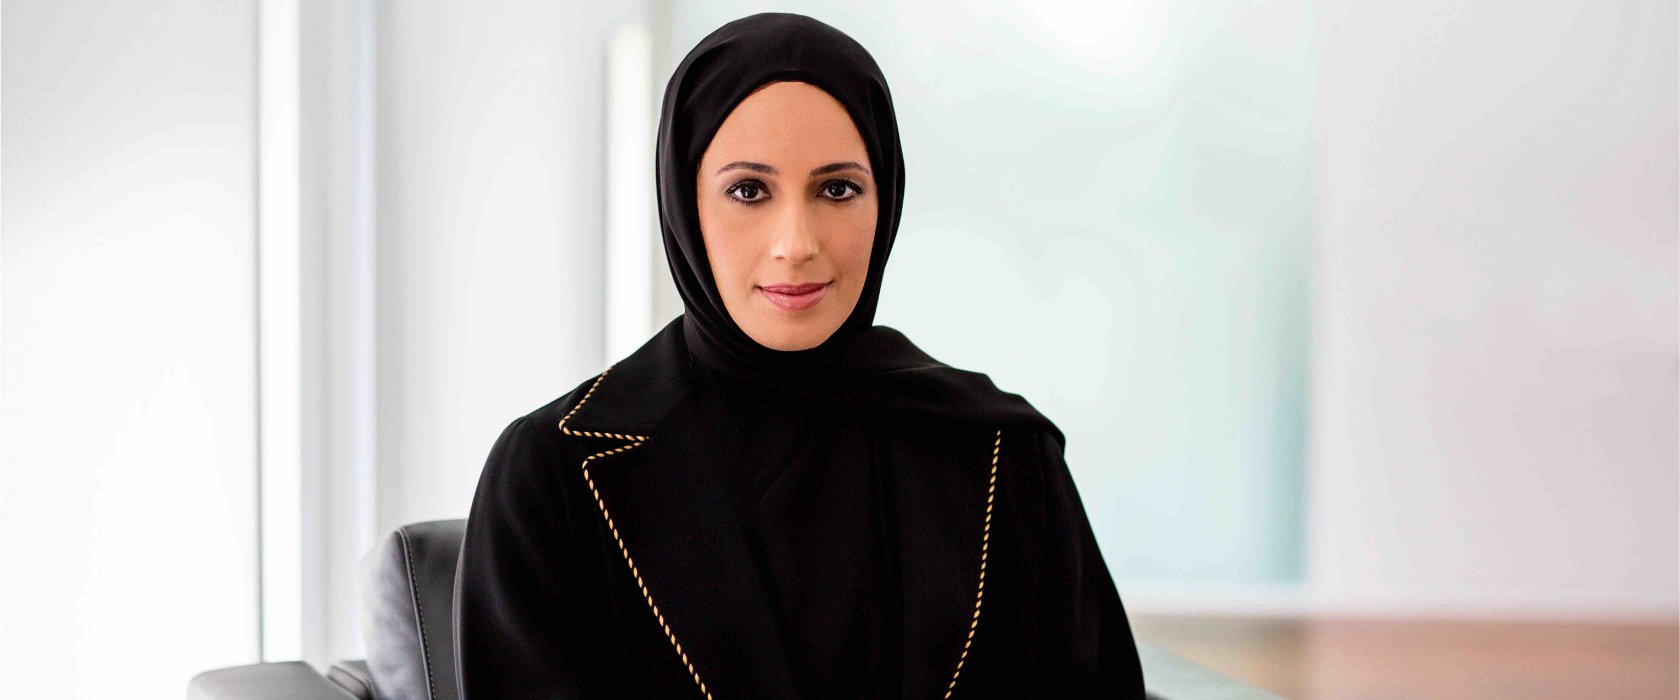 ‘Identity, culture and heritage, and values are integral to education at Qatar Foundation’